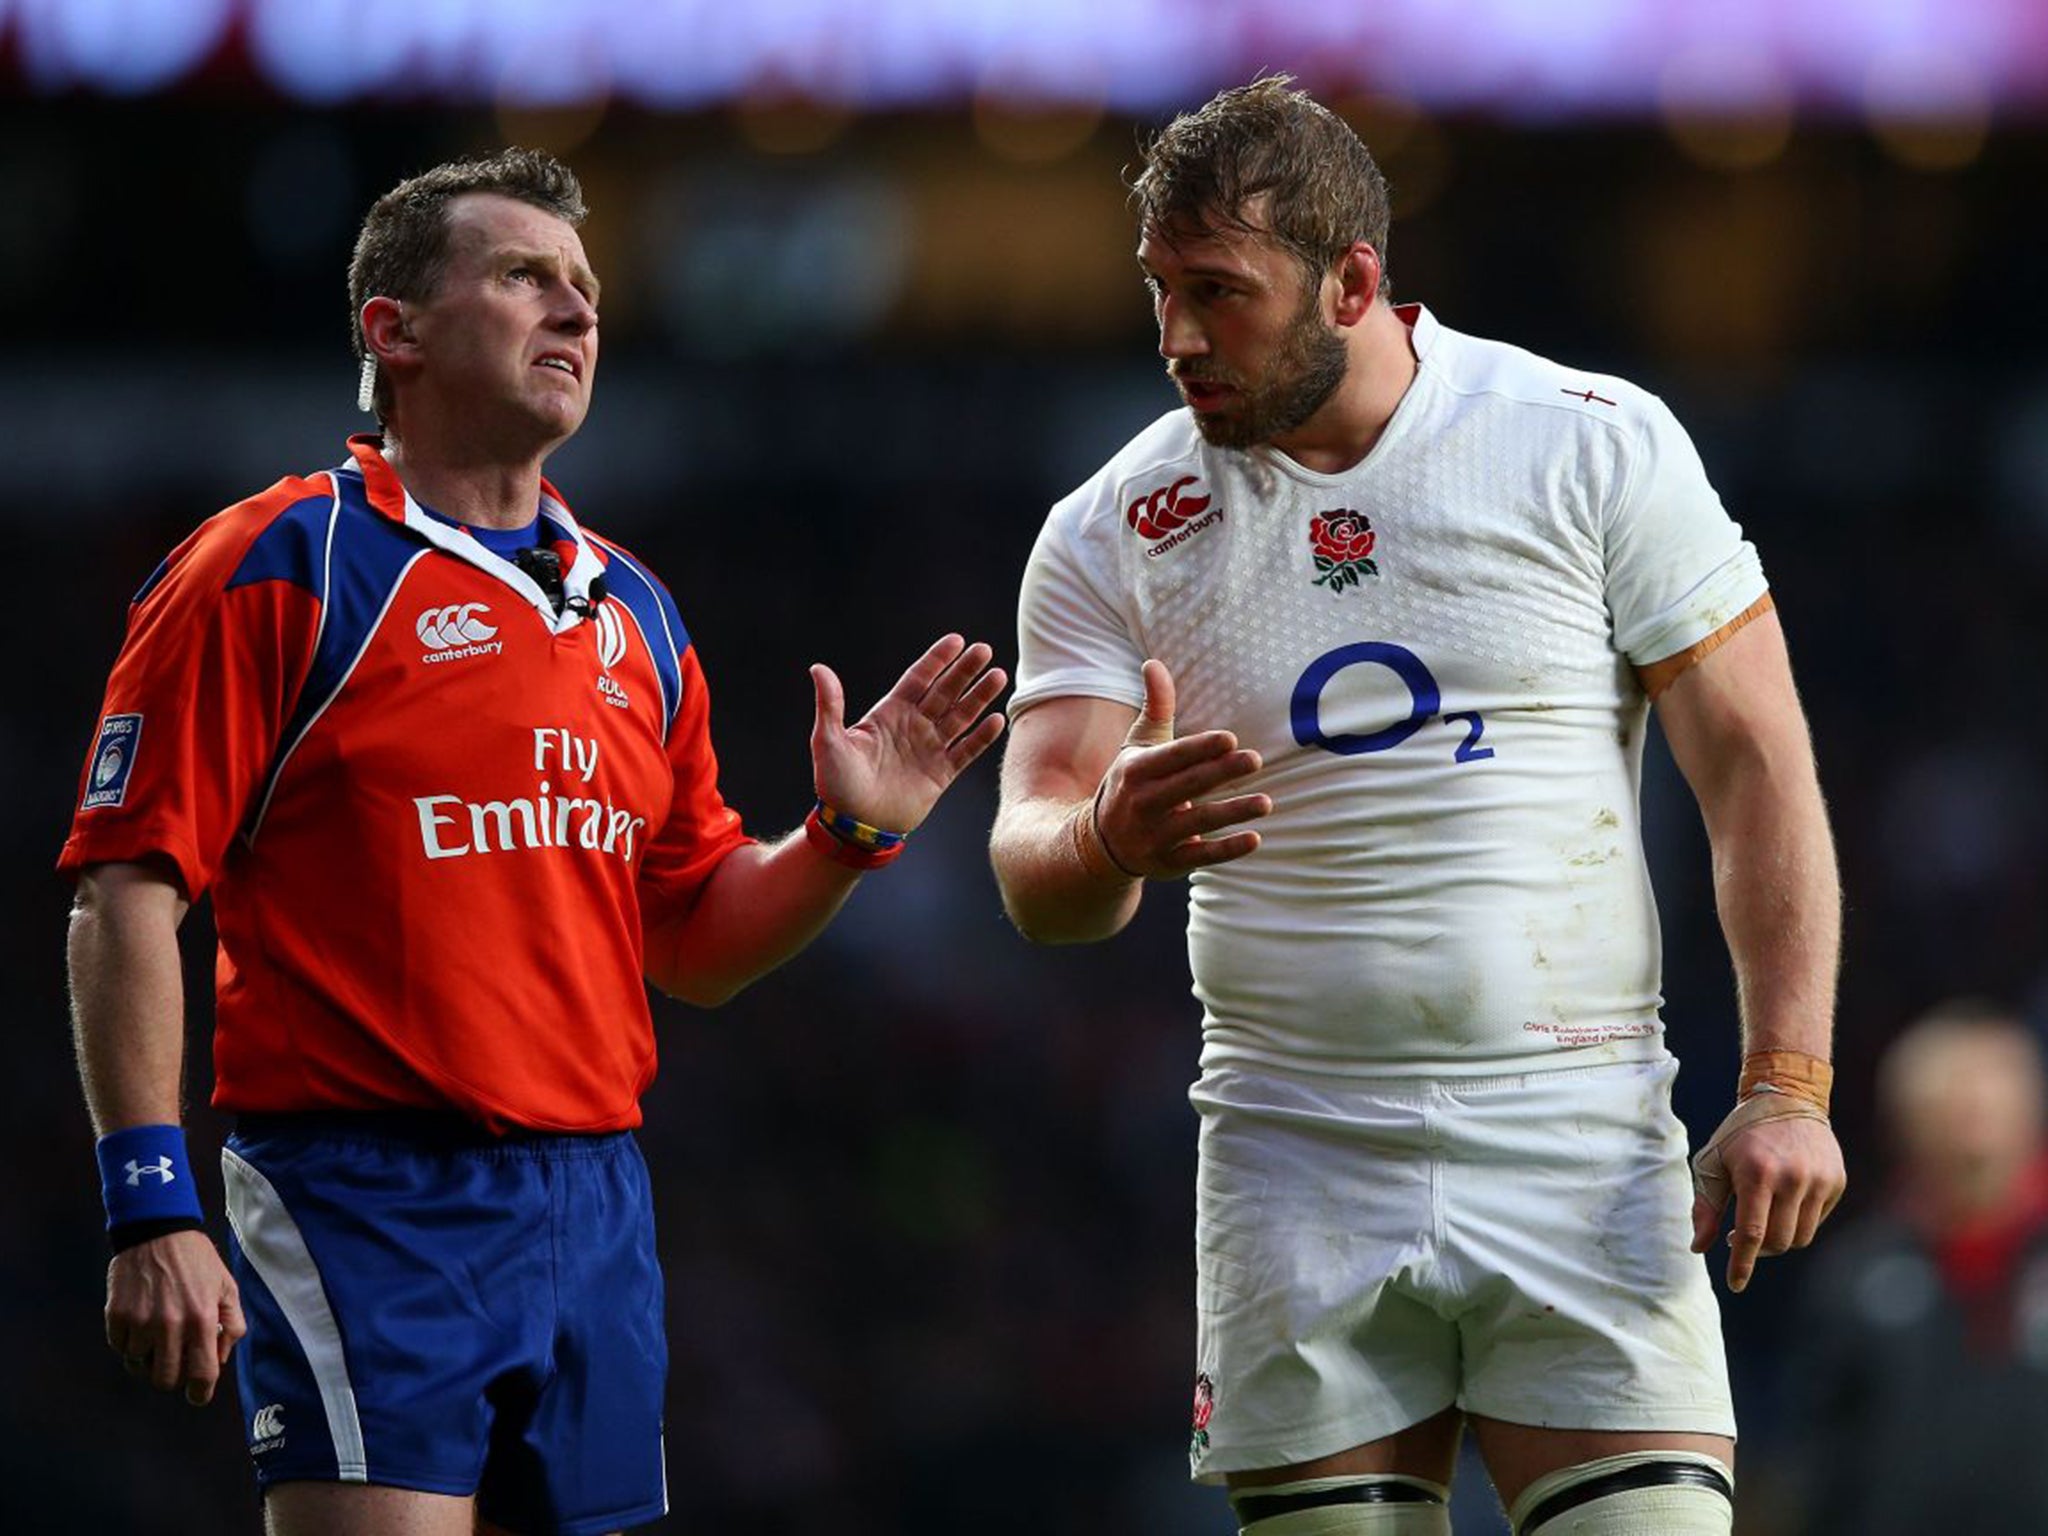 Nigel Owens suffered abuse on Twitter after refereeing England’s Six Nations decider against France earlier this month